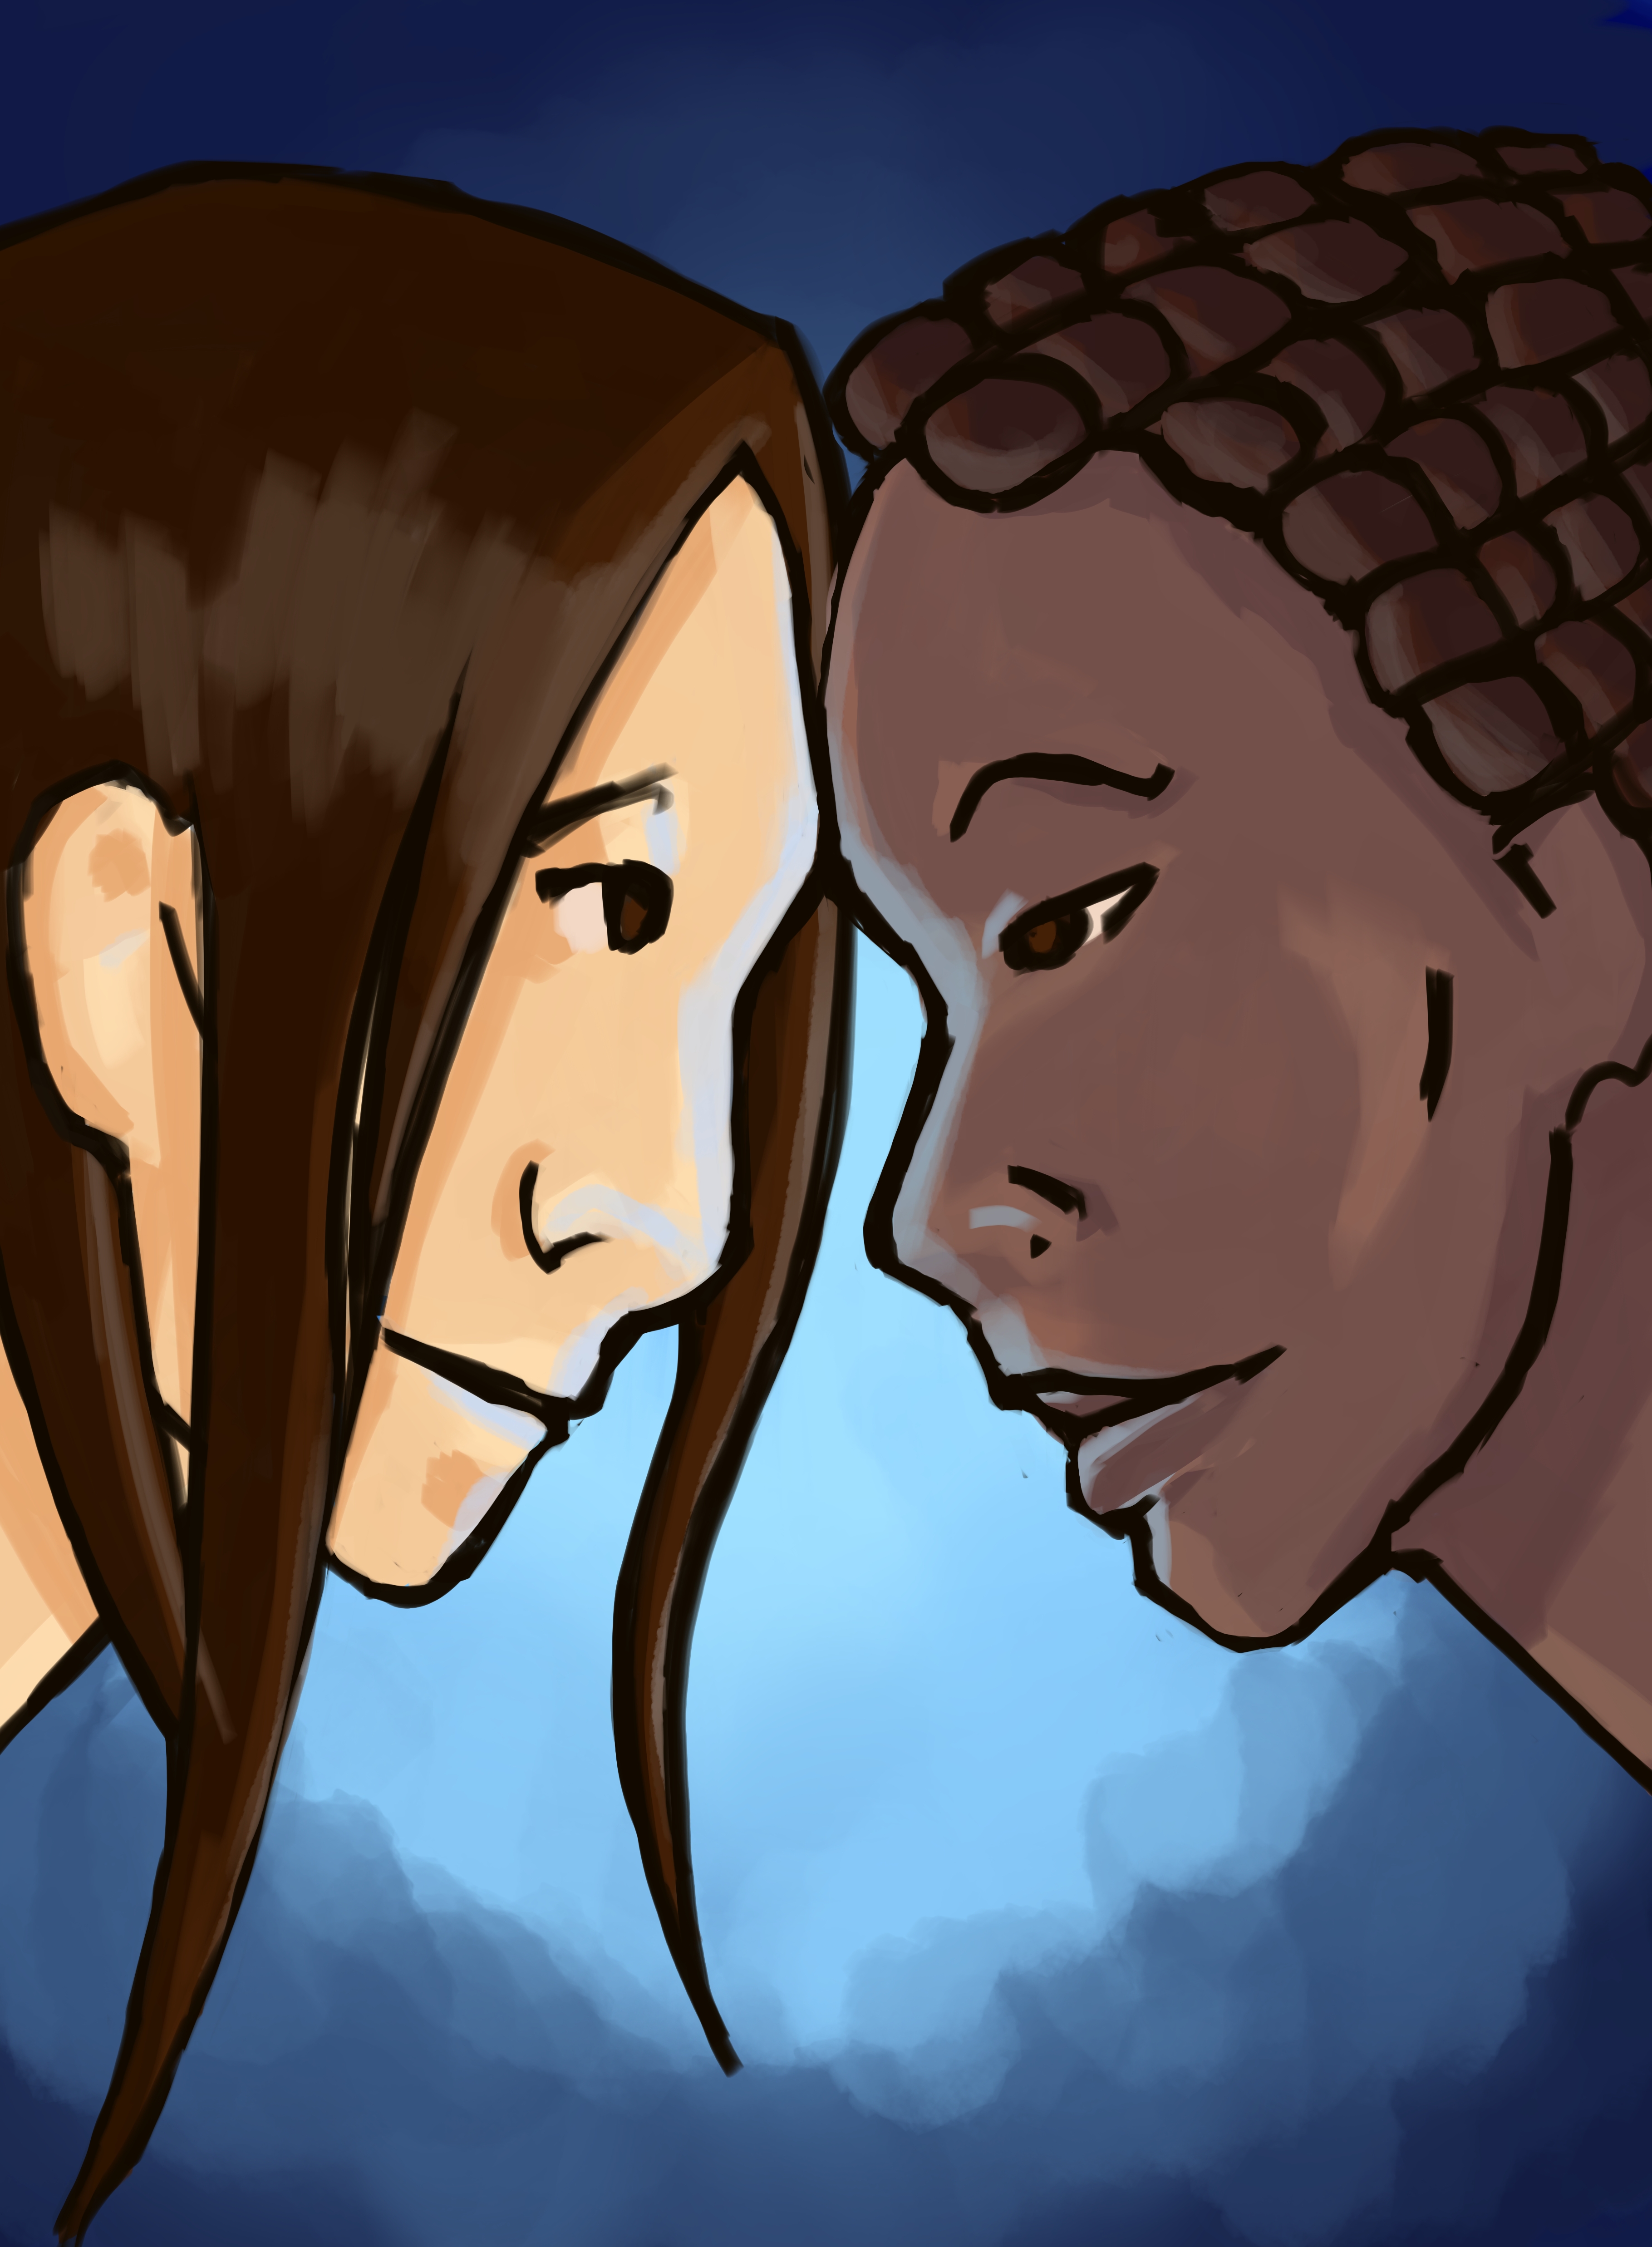 One light skinned person with dark hair and a dark skinned person with cornrows lean their heads together, smiling.